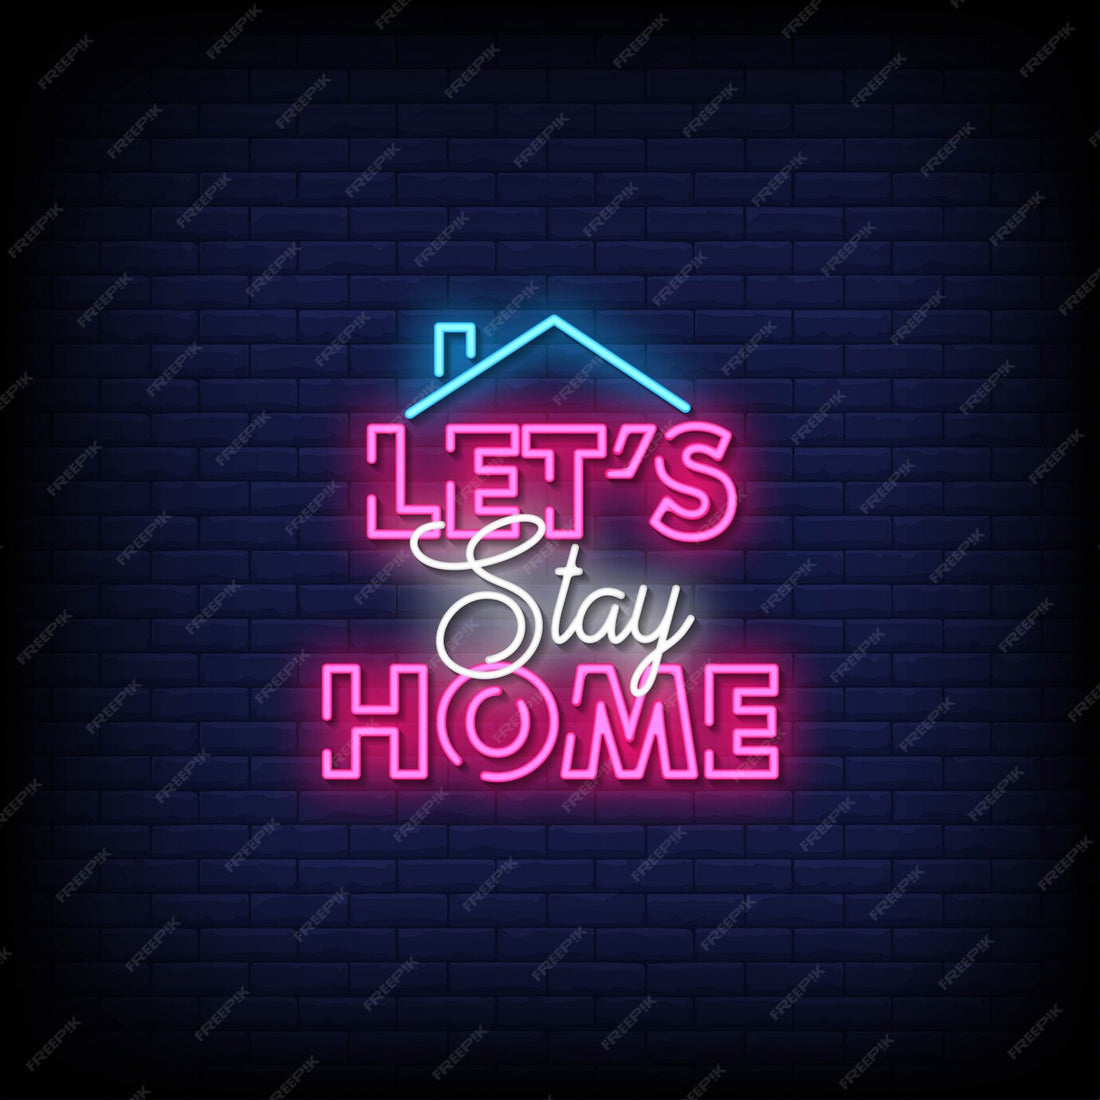 Lets stay home neon sign - home decor with neon signs - top 25 tips